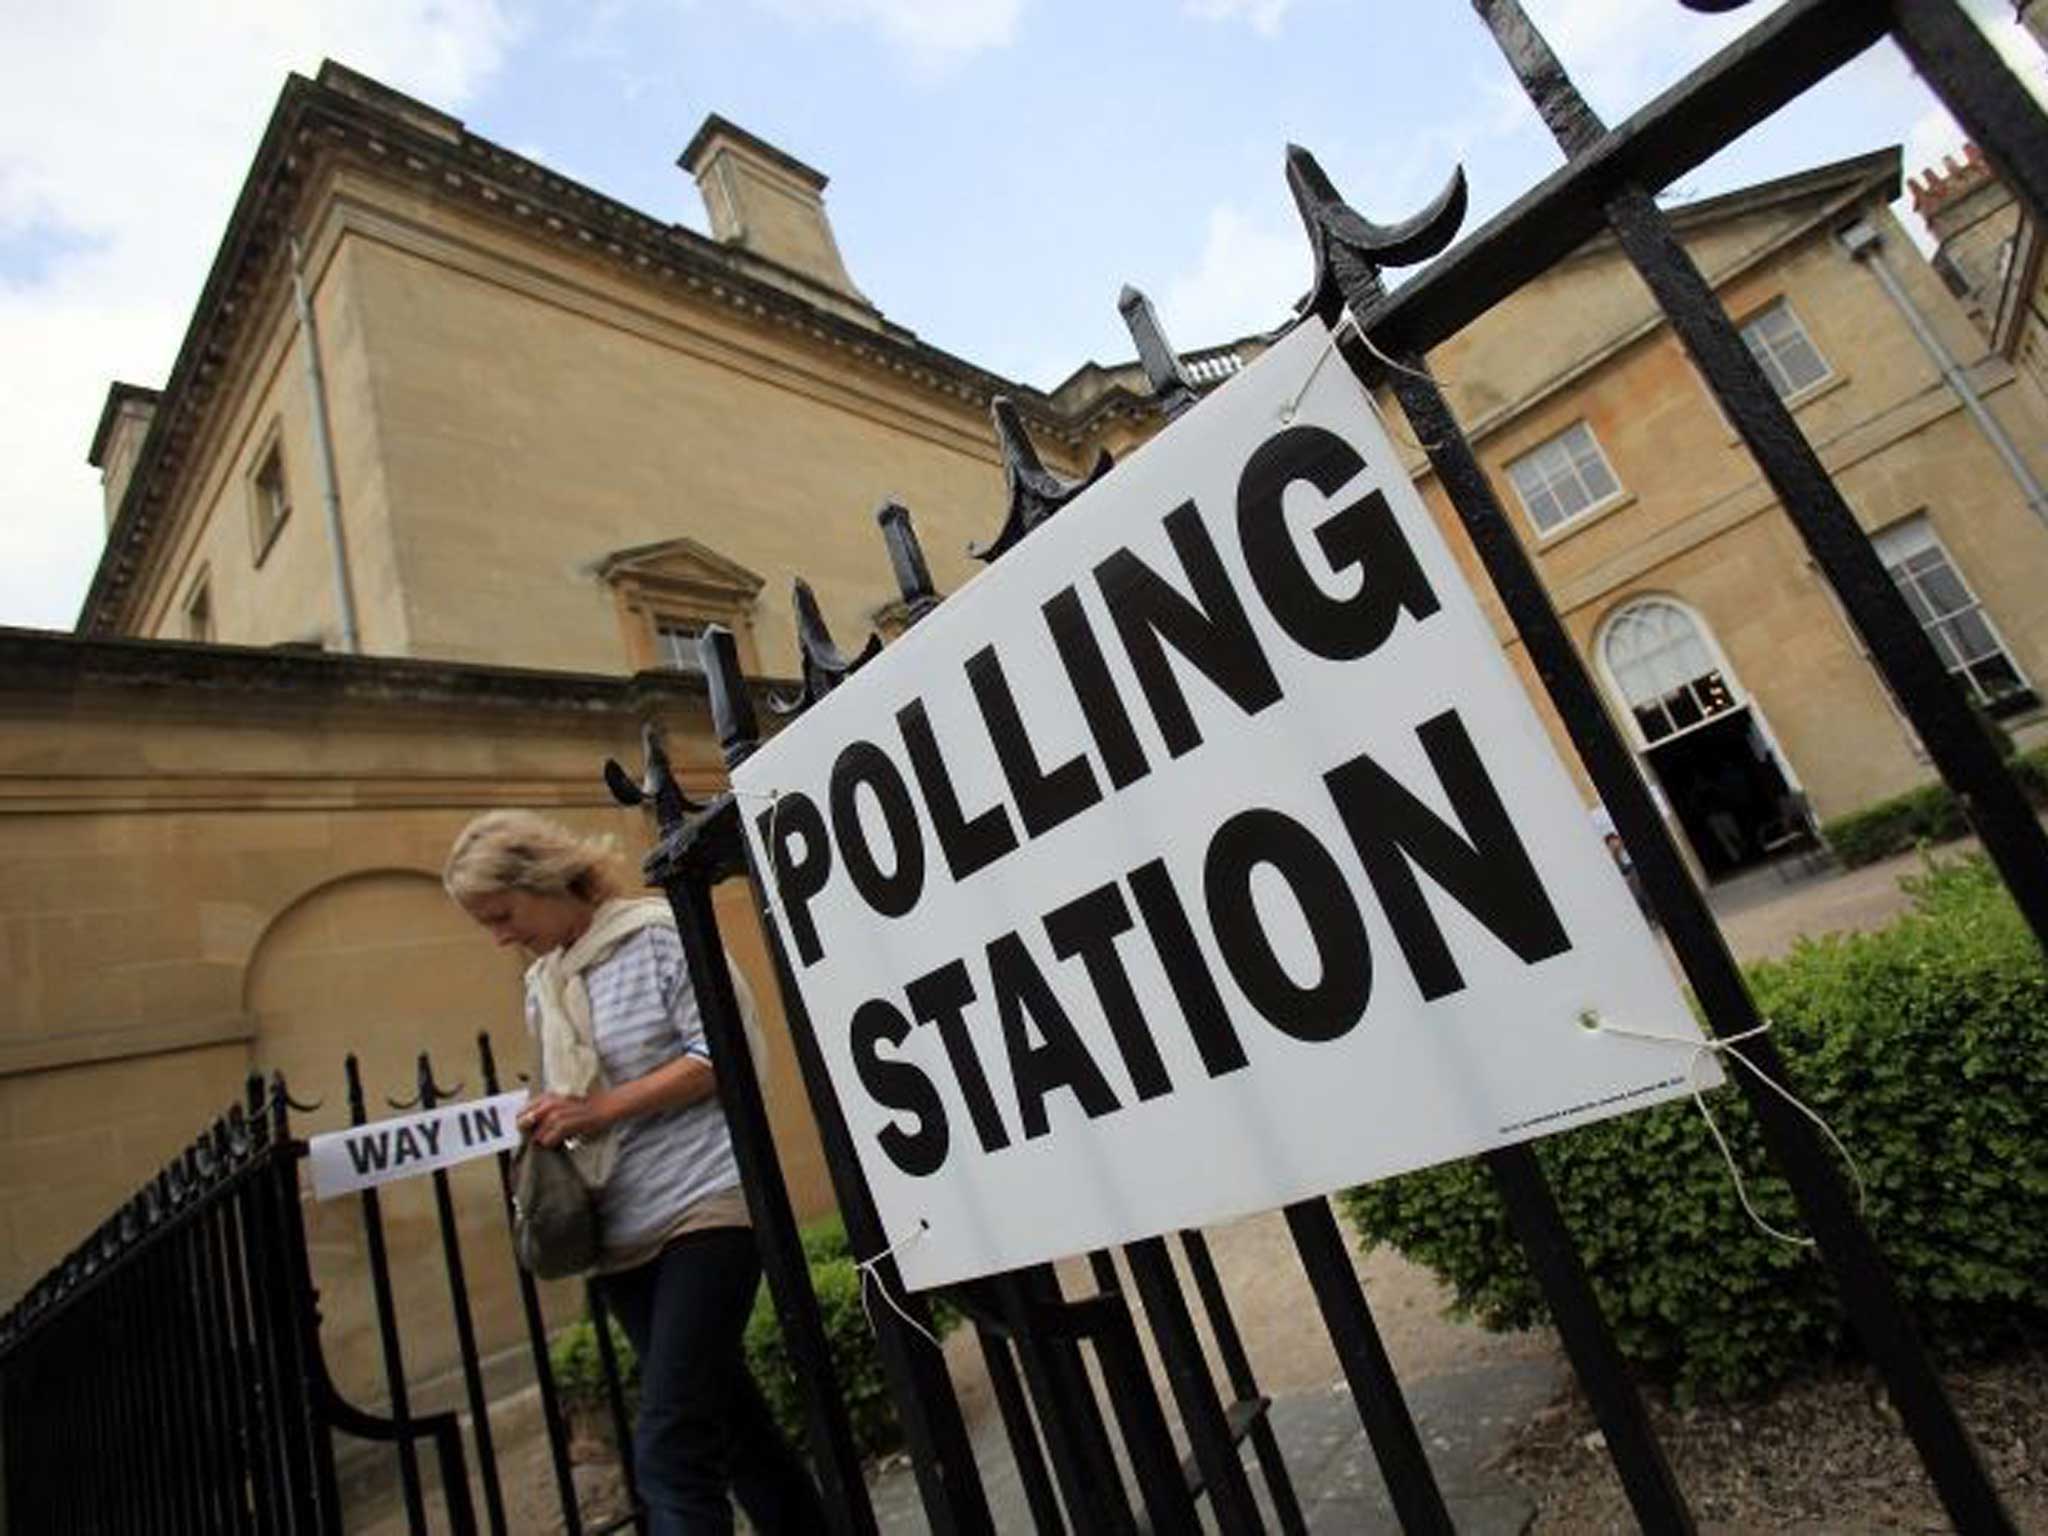 Party policies get tilted towards those who vote, says IPPR 